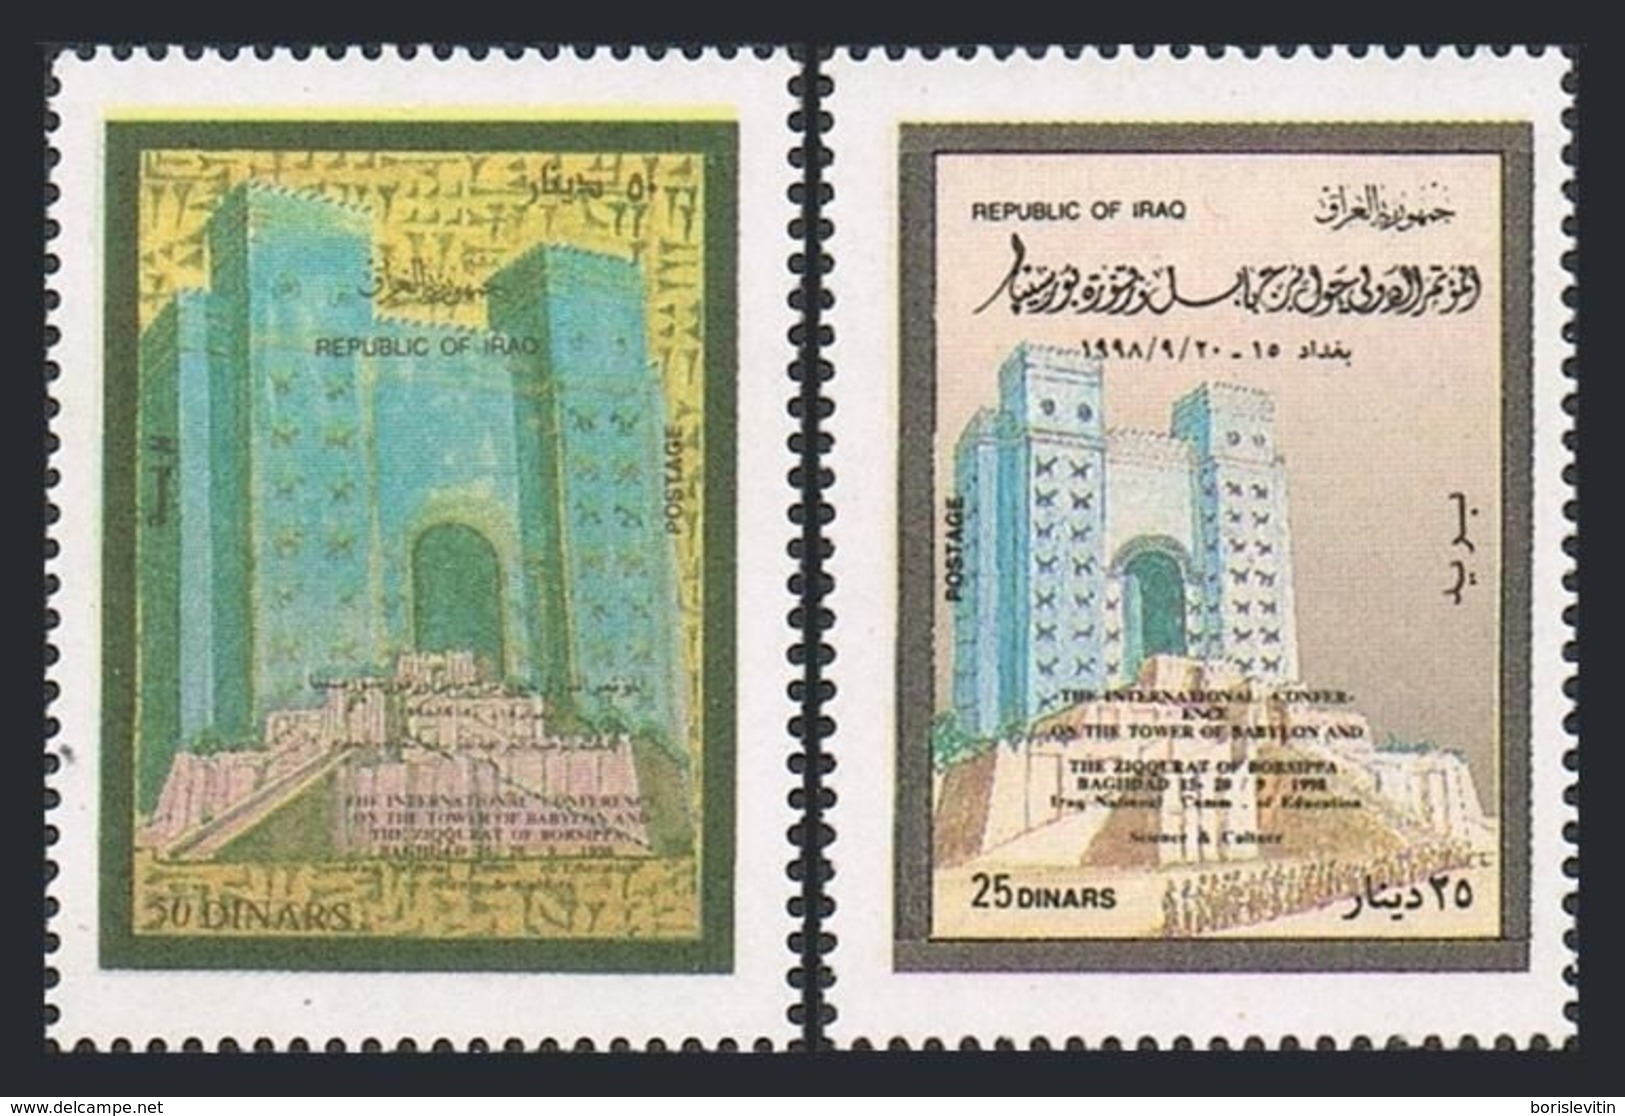 Iraq 1553-1554,MNH. Conference On Tower Of Babel And Ziggurat Of Brsippa,1999. - Iraq